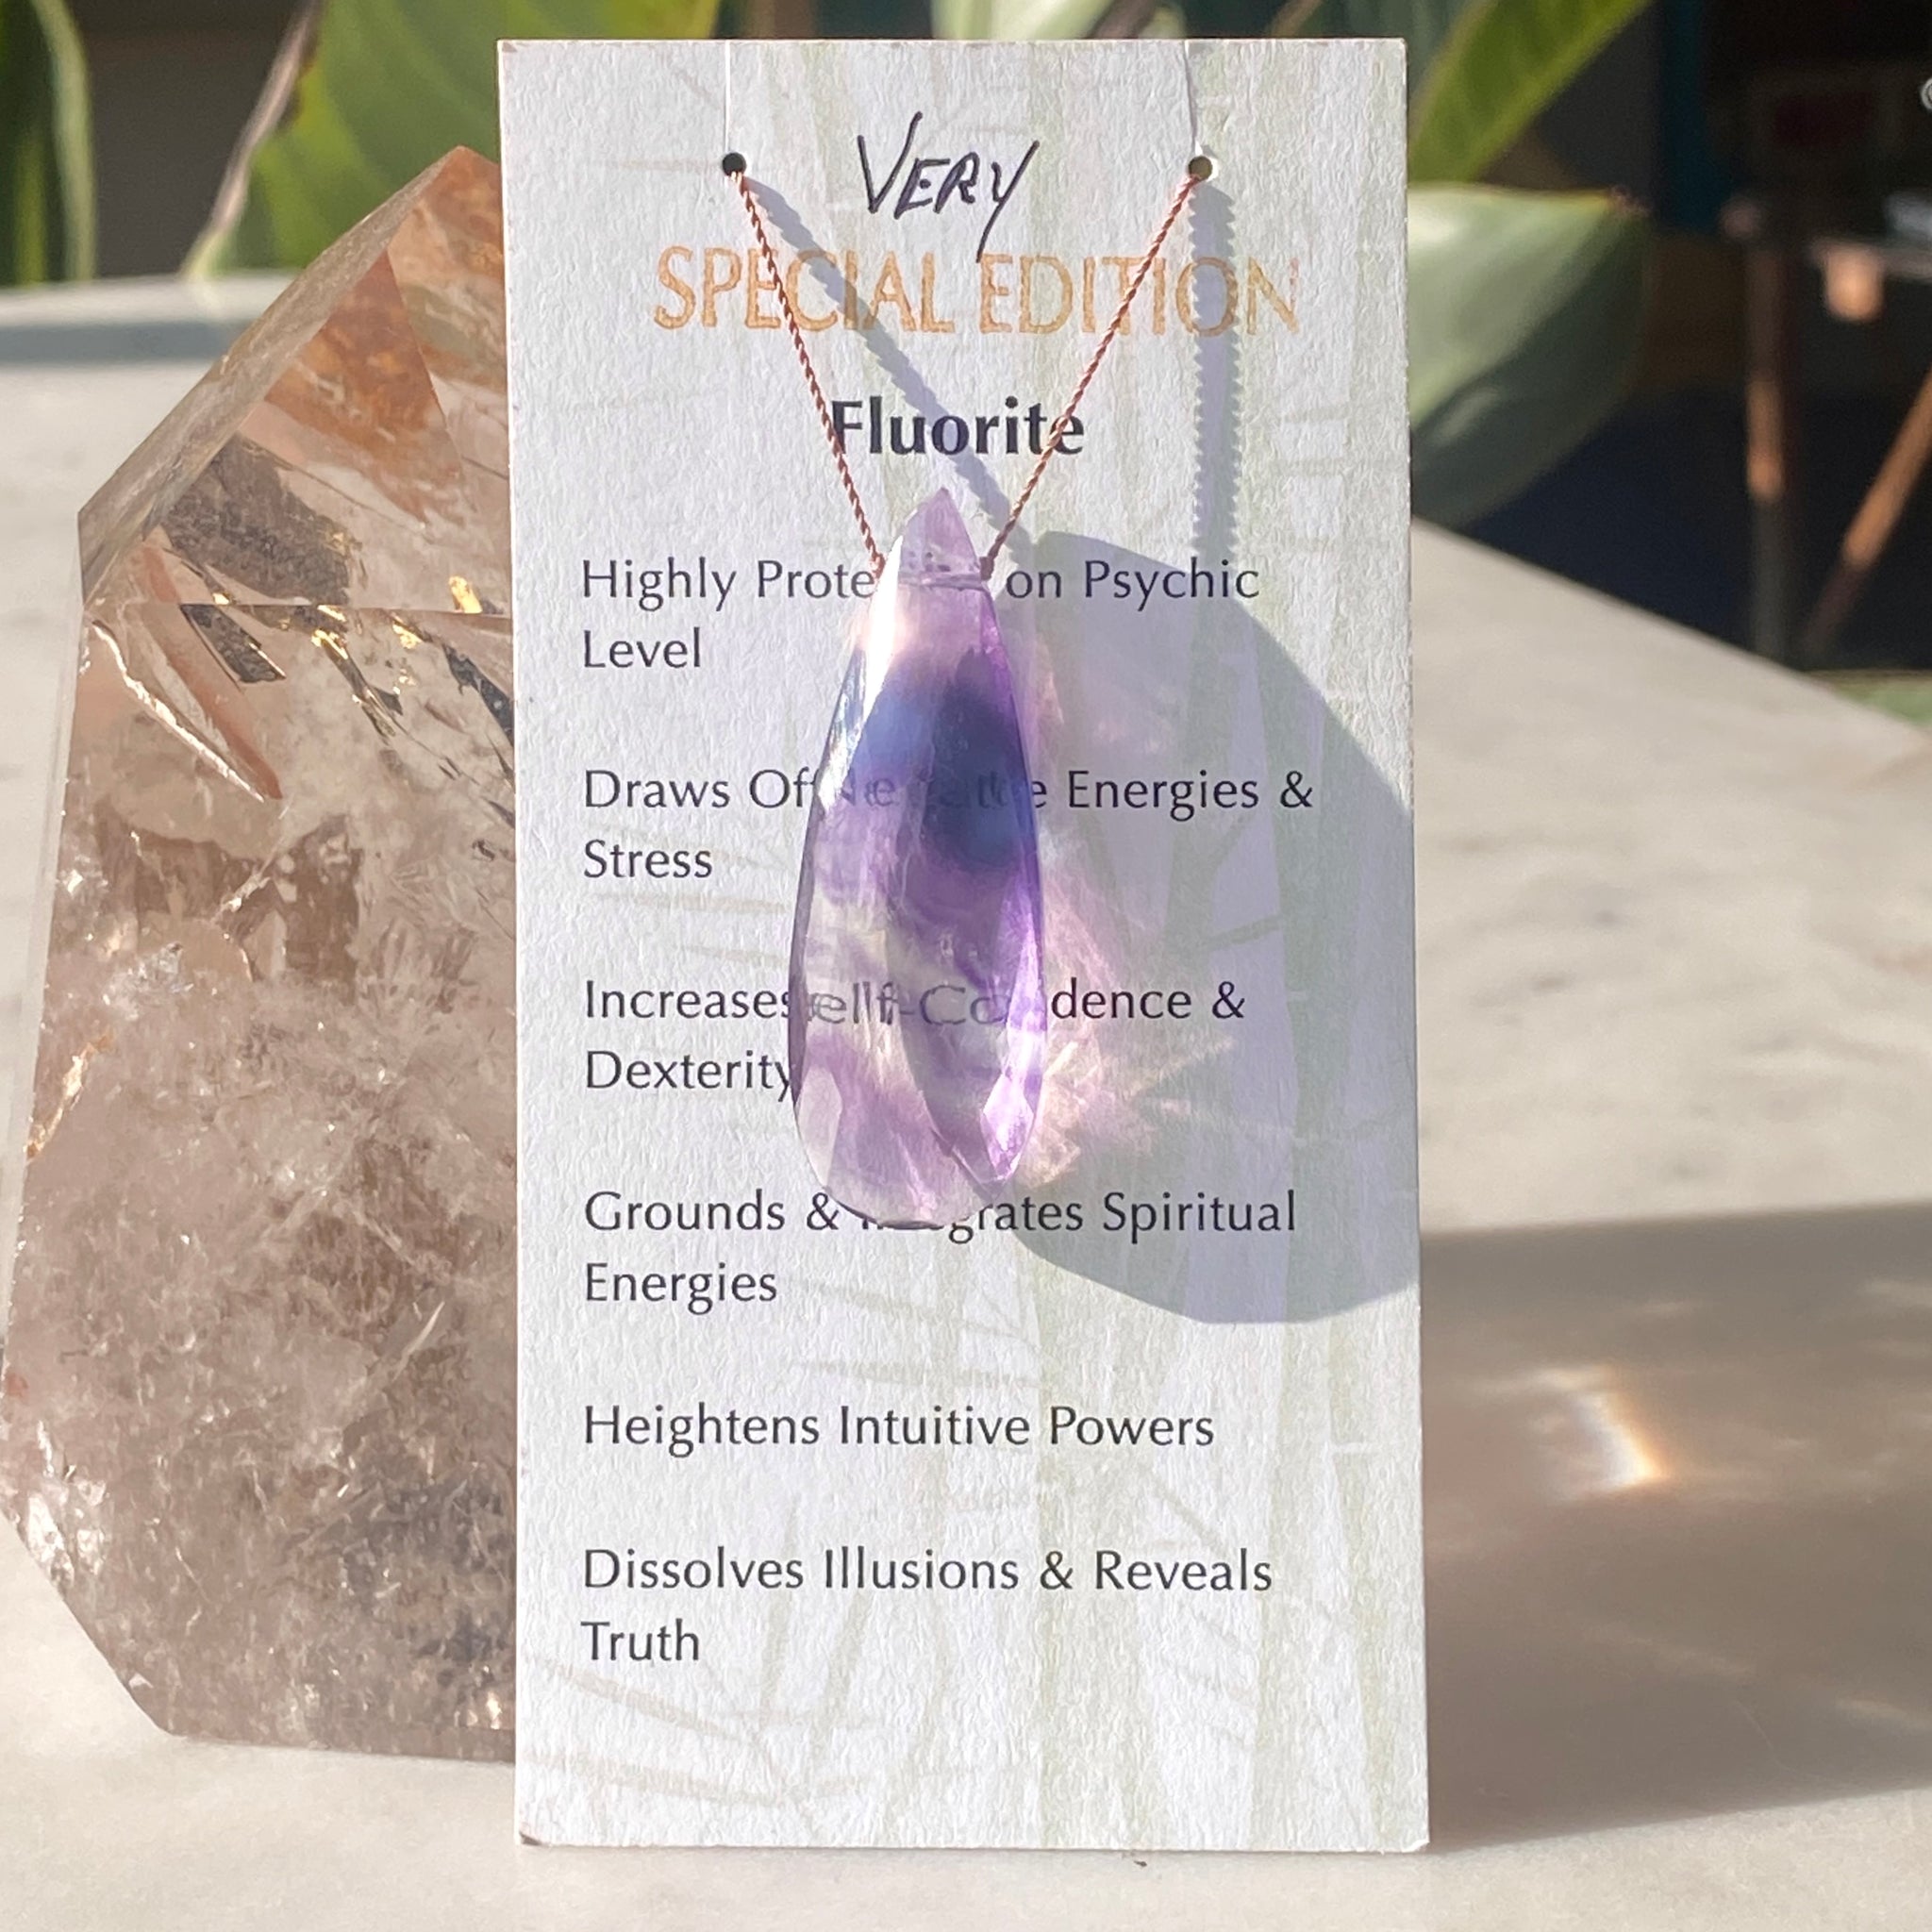 Fluorite Very Special Edition